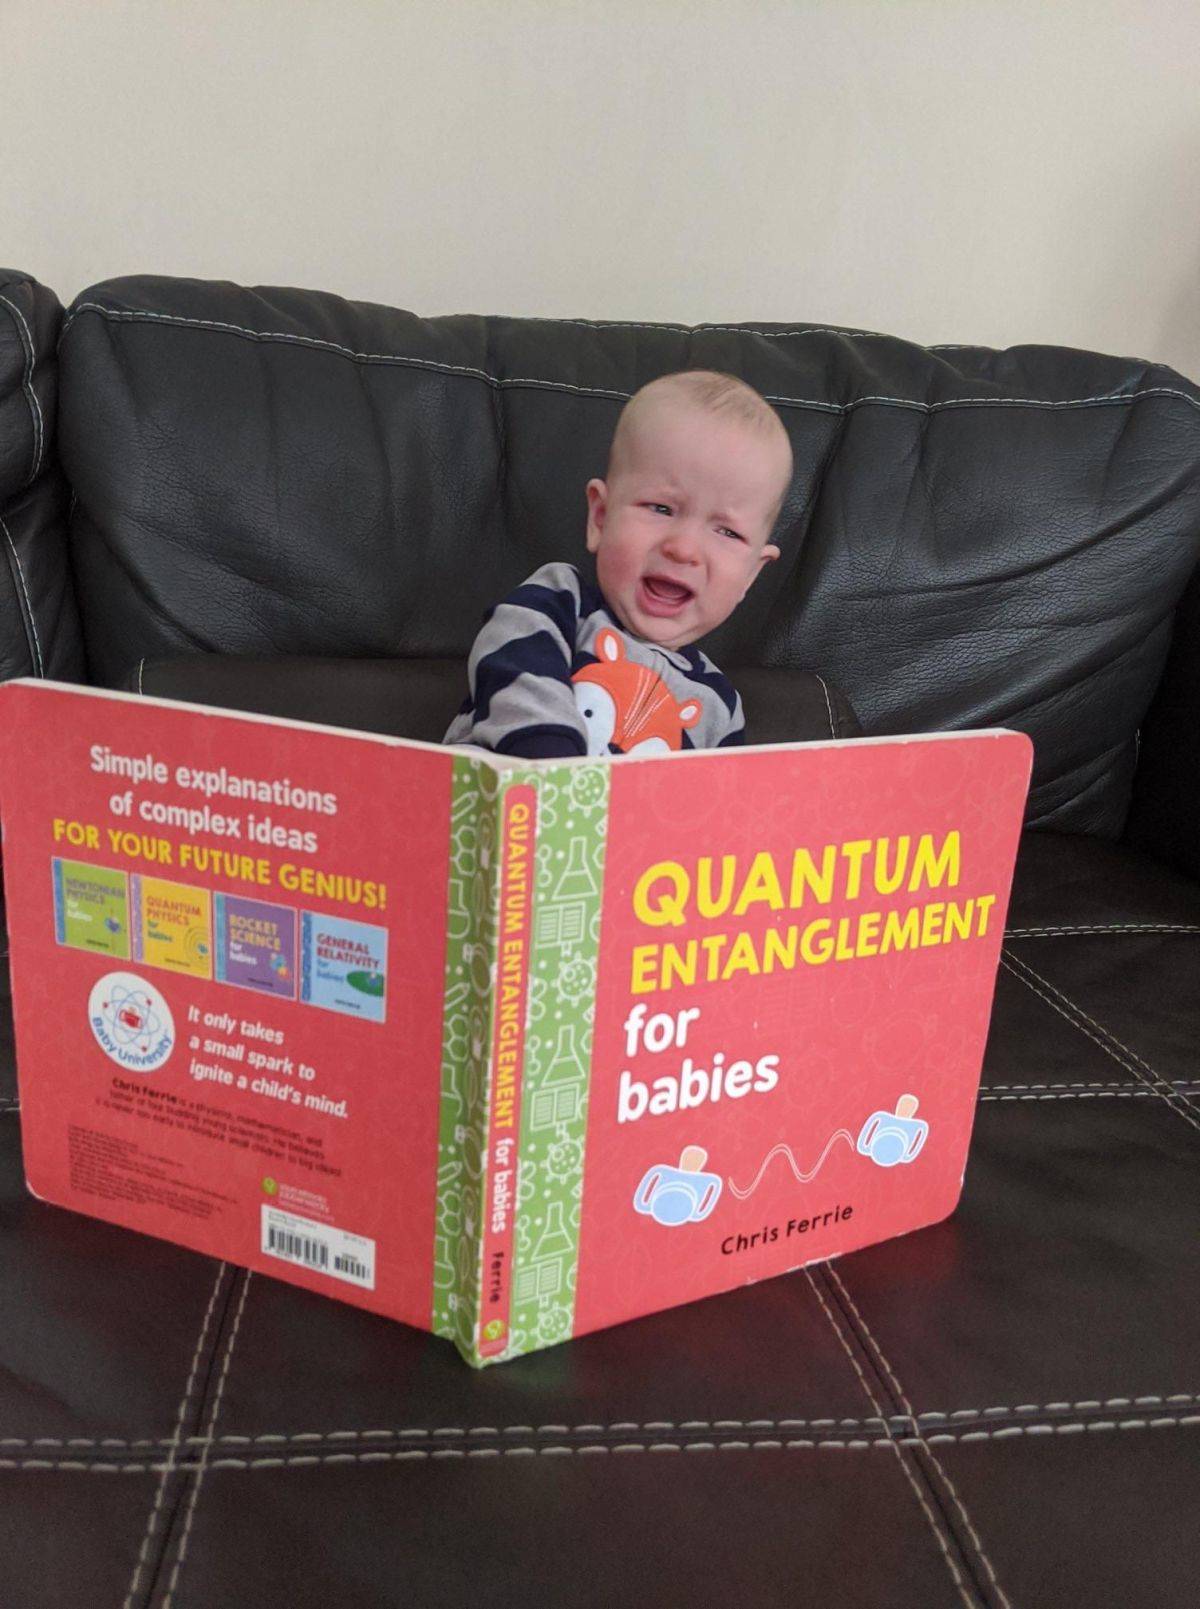 toddler - Simple explanations of complex ideas For Your Future Genius! Quantum Entanglement It only takes a small spark to ignite a child's mind. Quantum Entanglement for babies for for babies Chris Ferrie